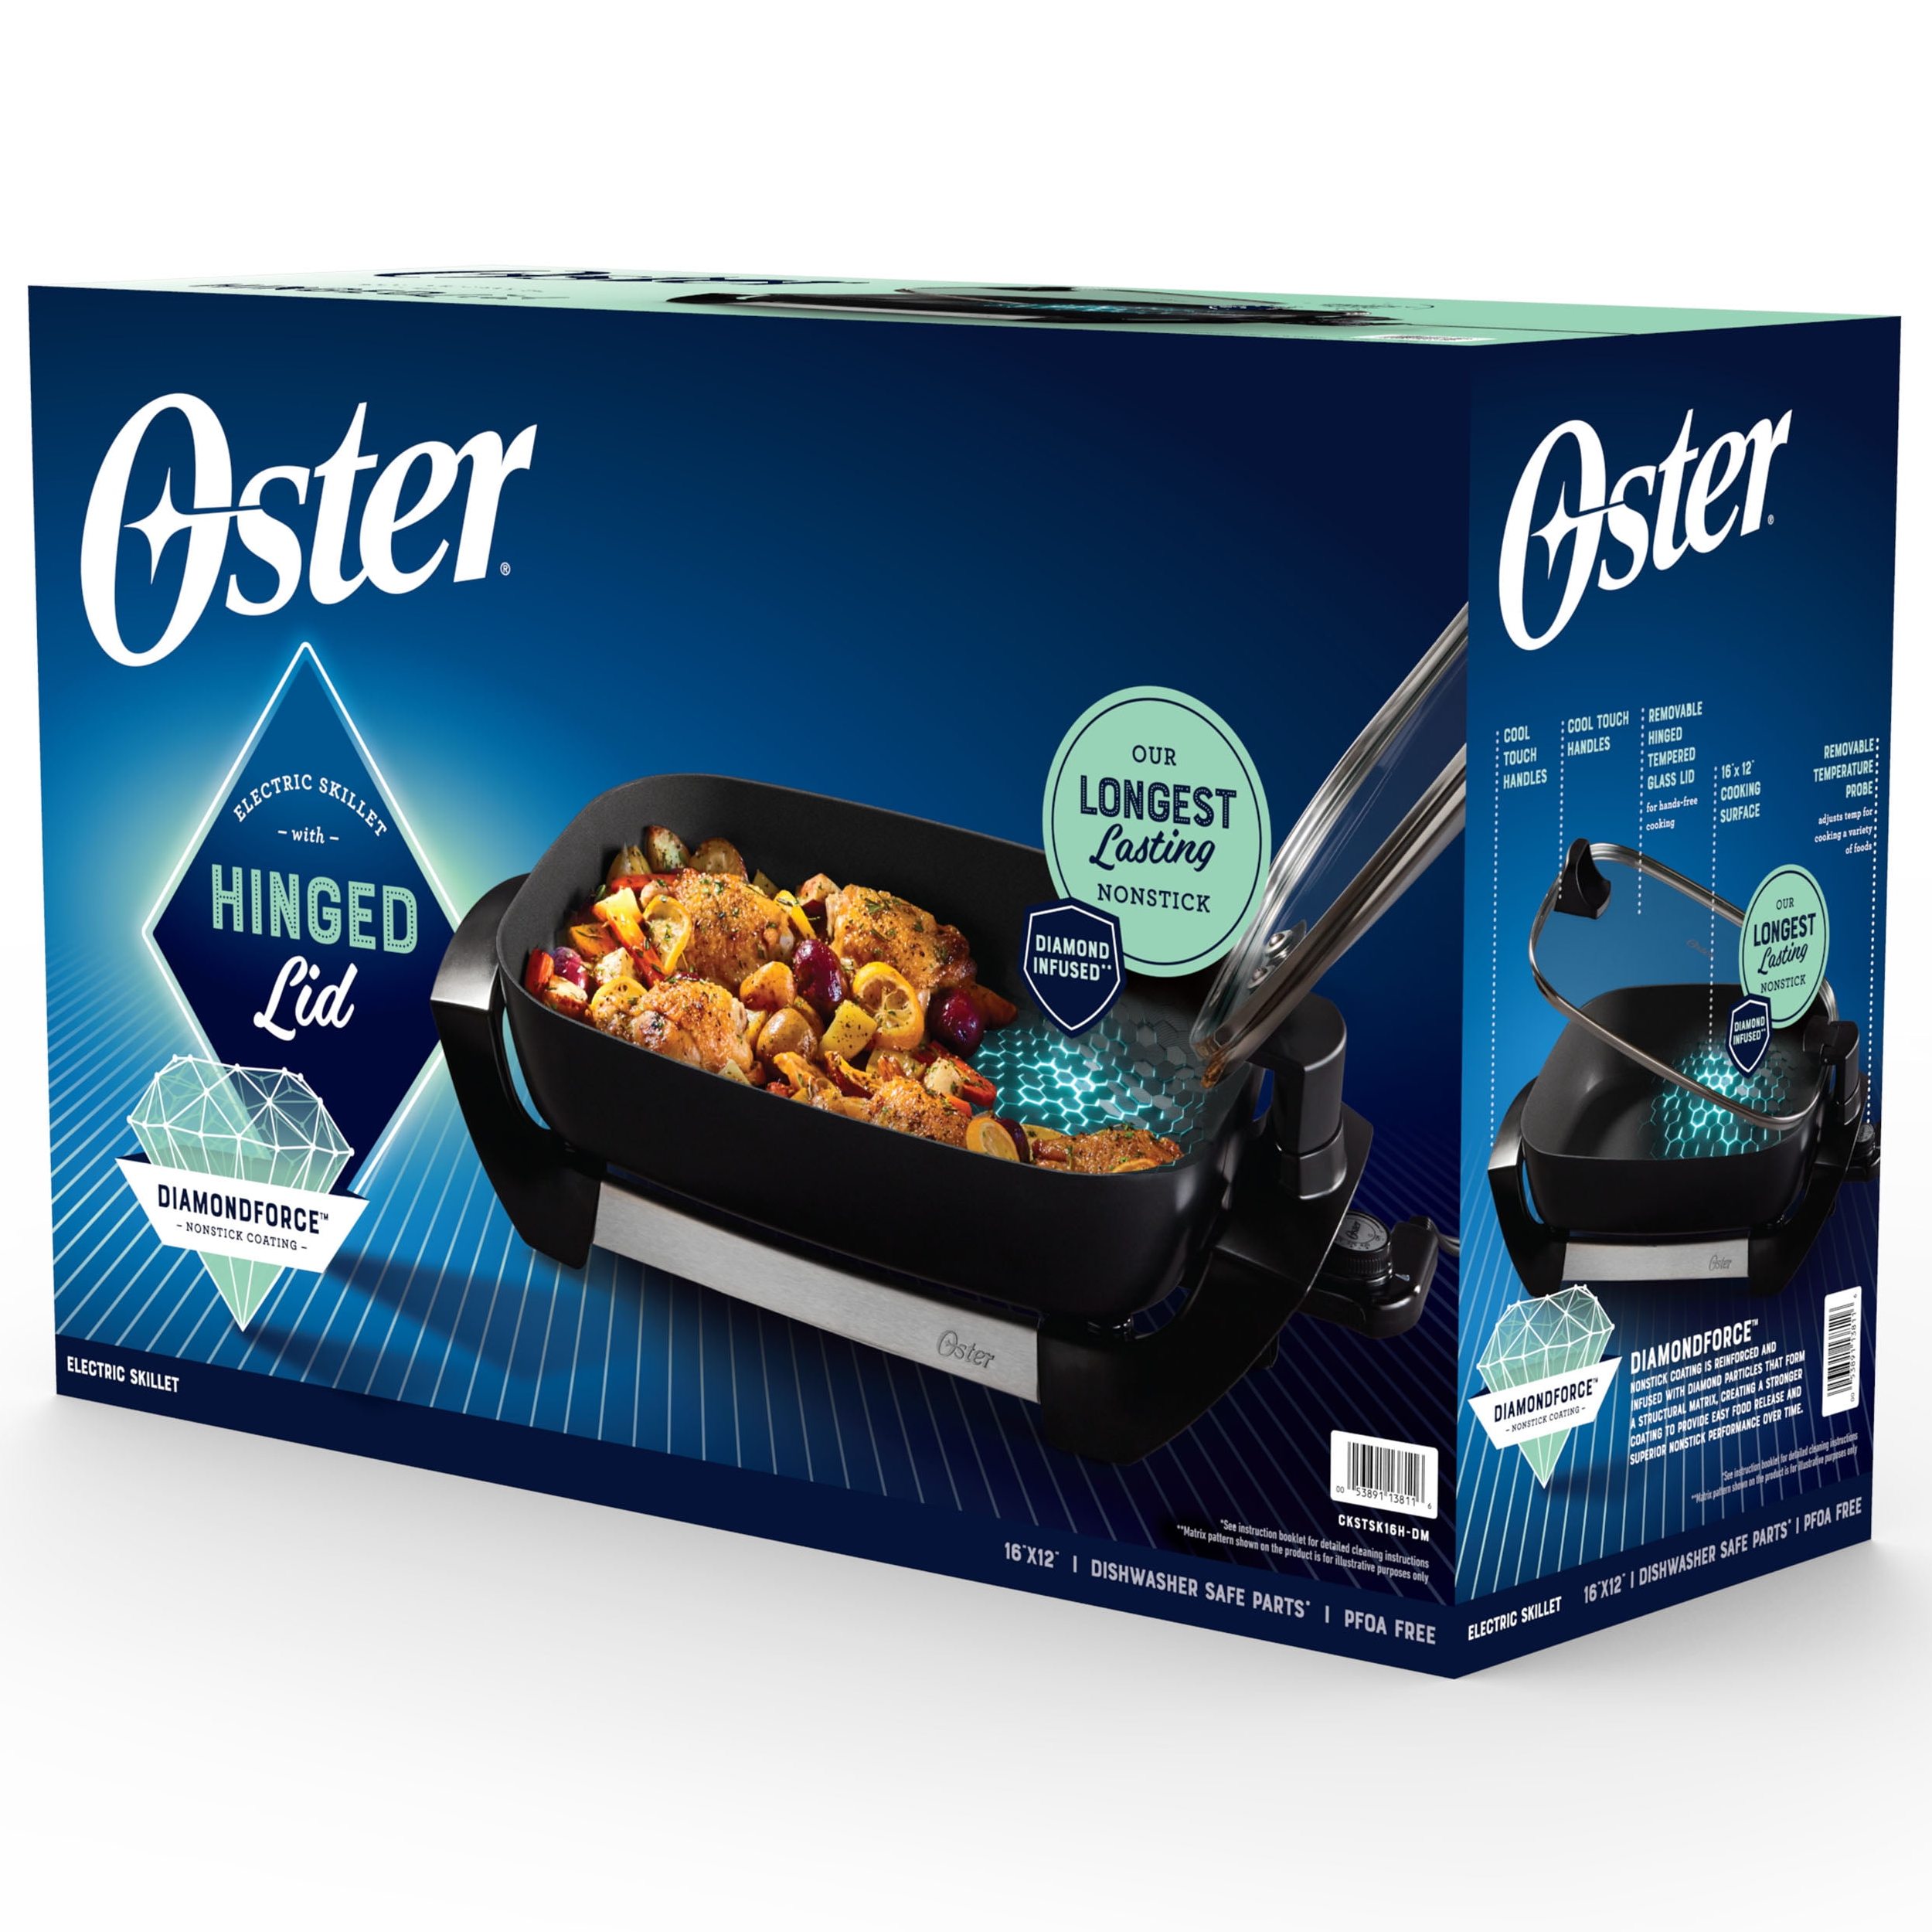 Oster DiamondForce 12-in x 16-in Nonstick Electric Skillet with Hinged Lid, Black - image 4 of 11